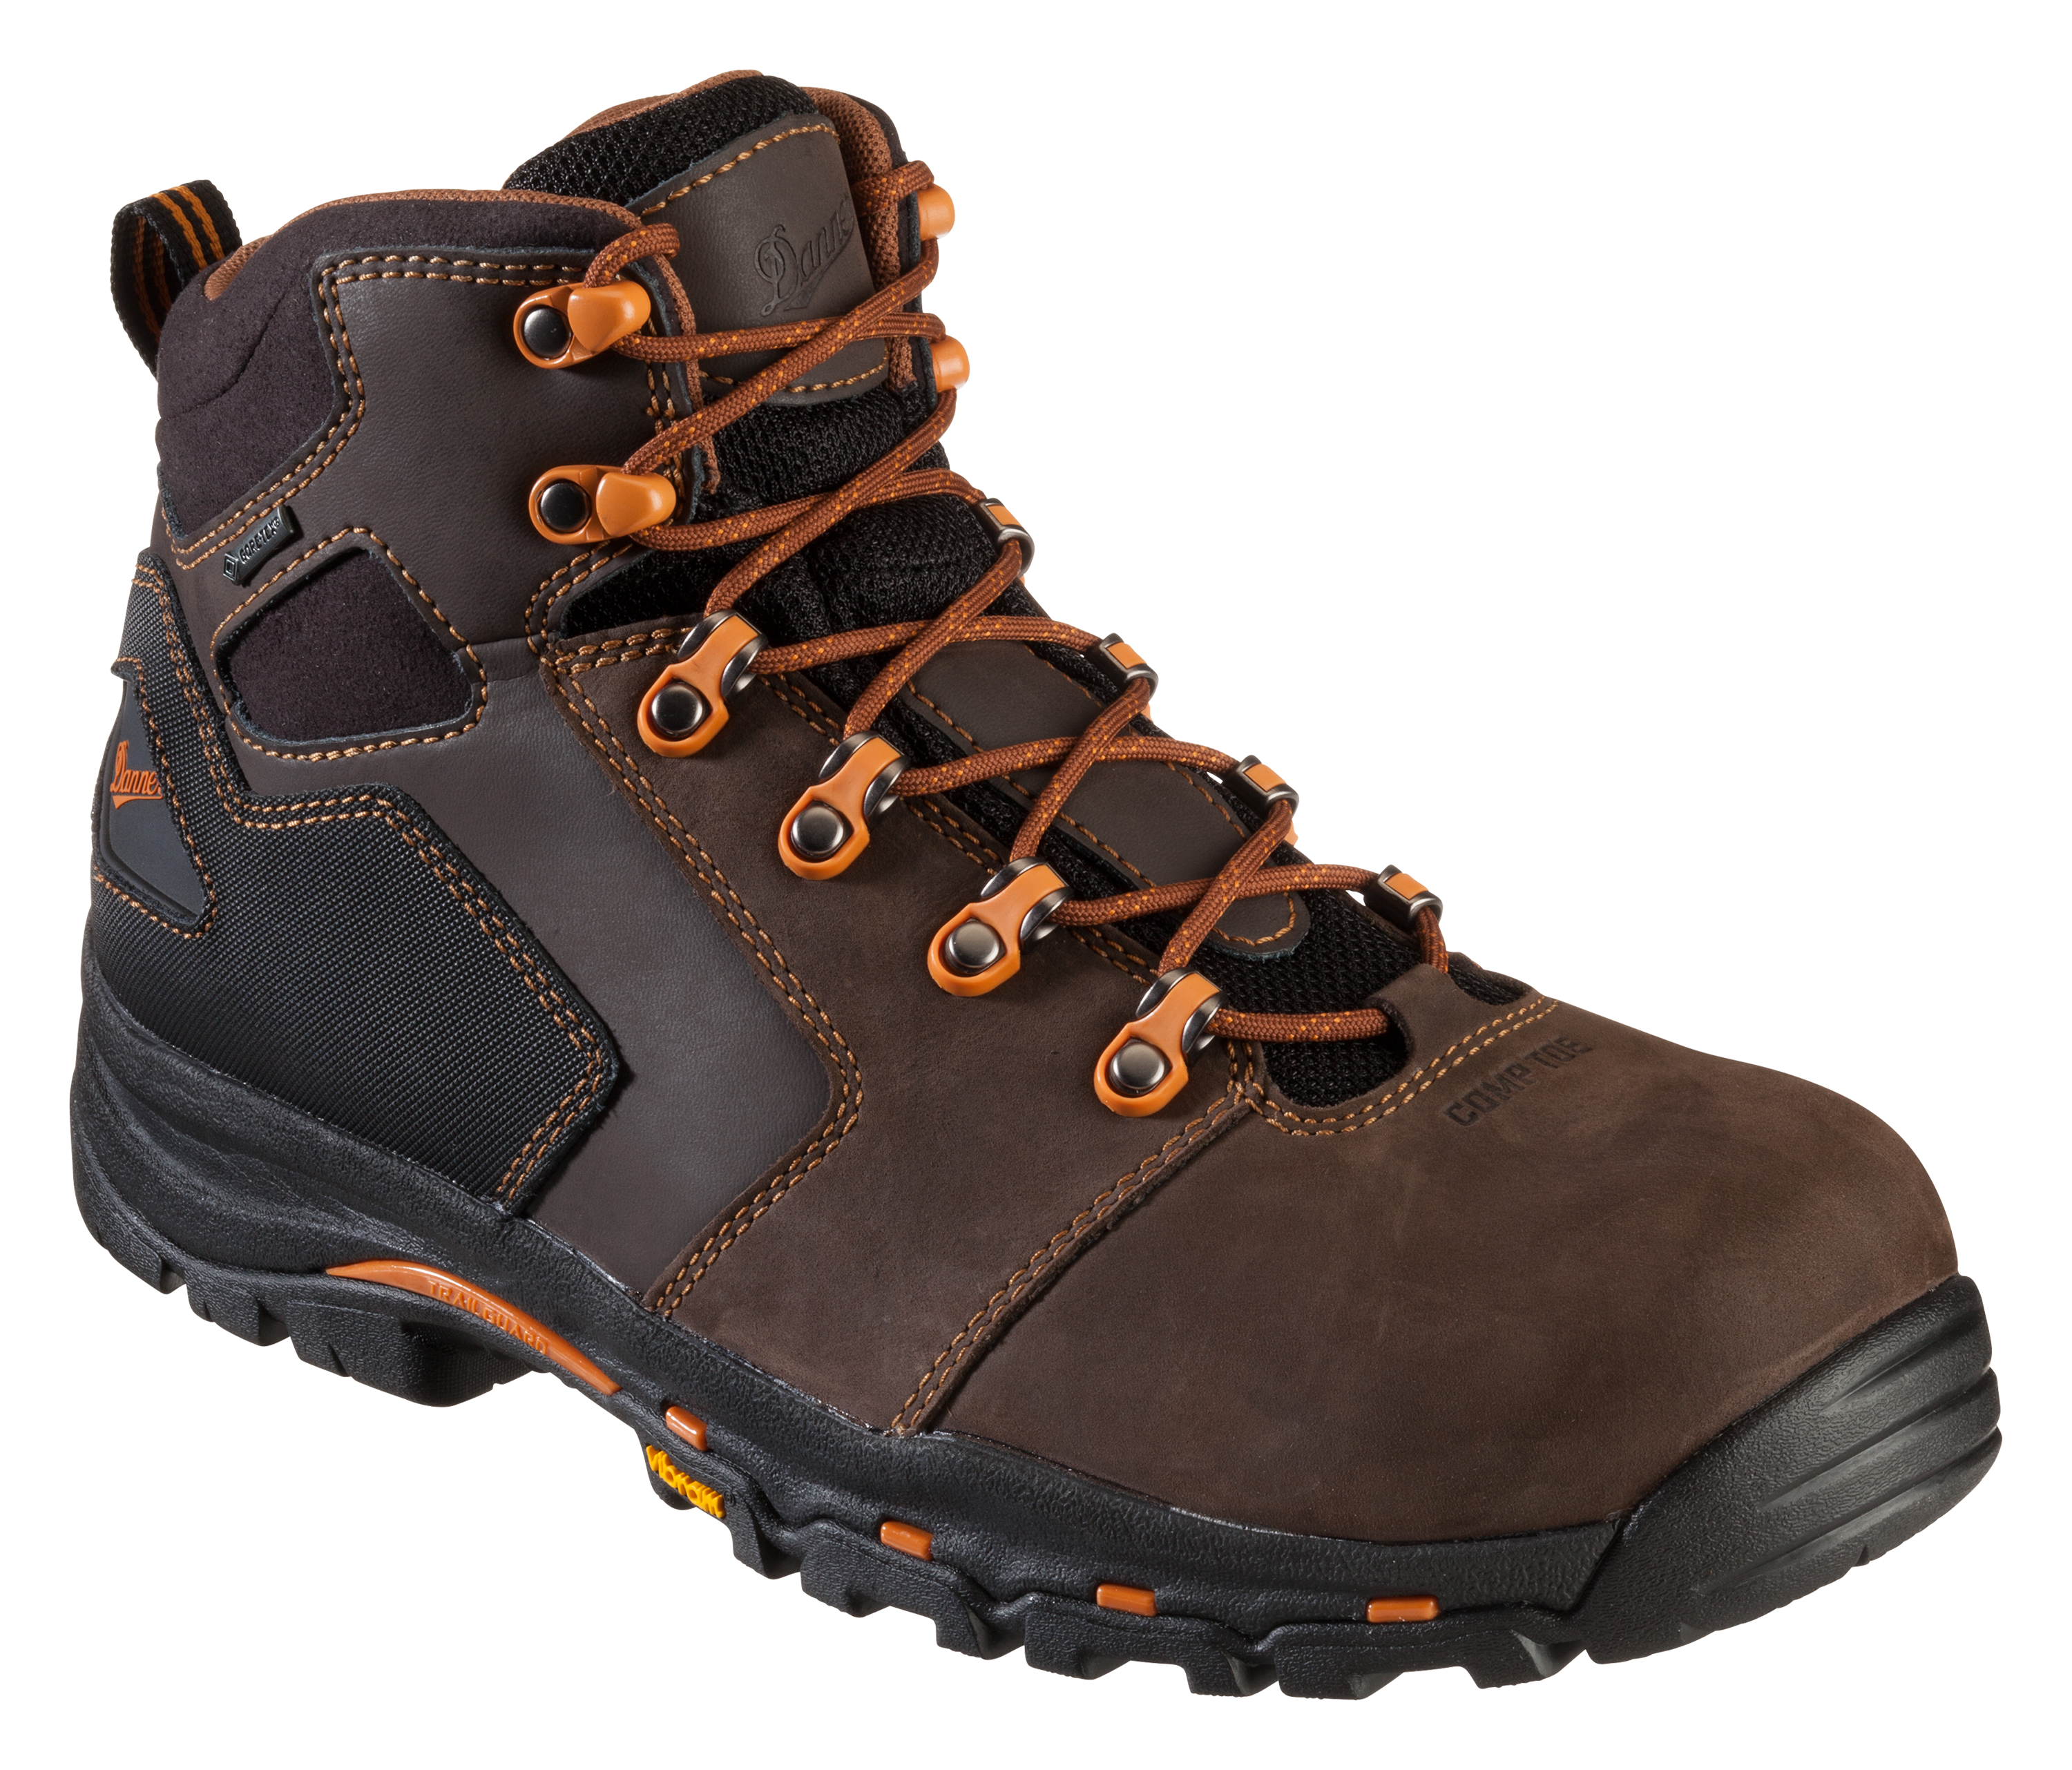 Danner Vicious GORE-TEX Non-Metallic Safety Toe Work Boots for Men - Brown - 13M